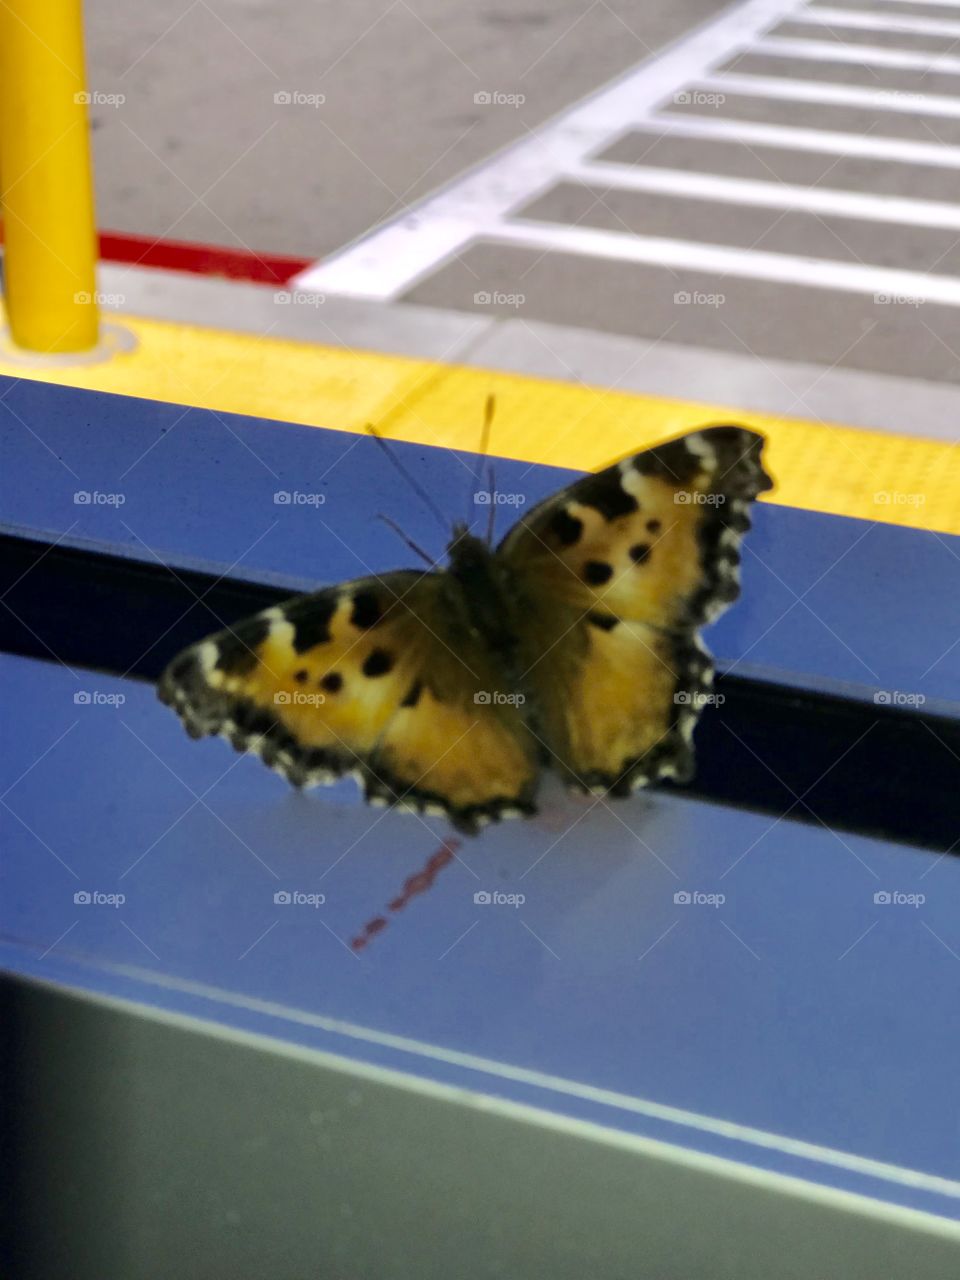 Butterfly in the store I was so excited 